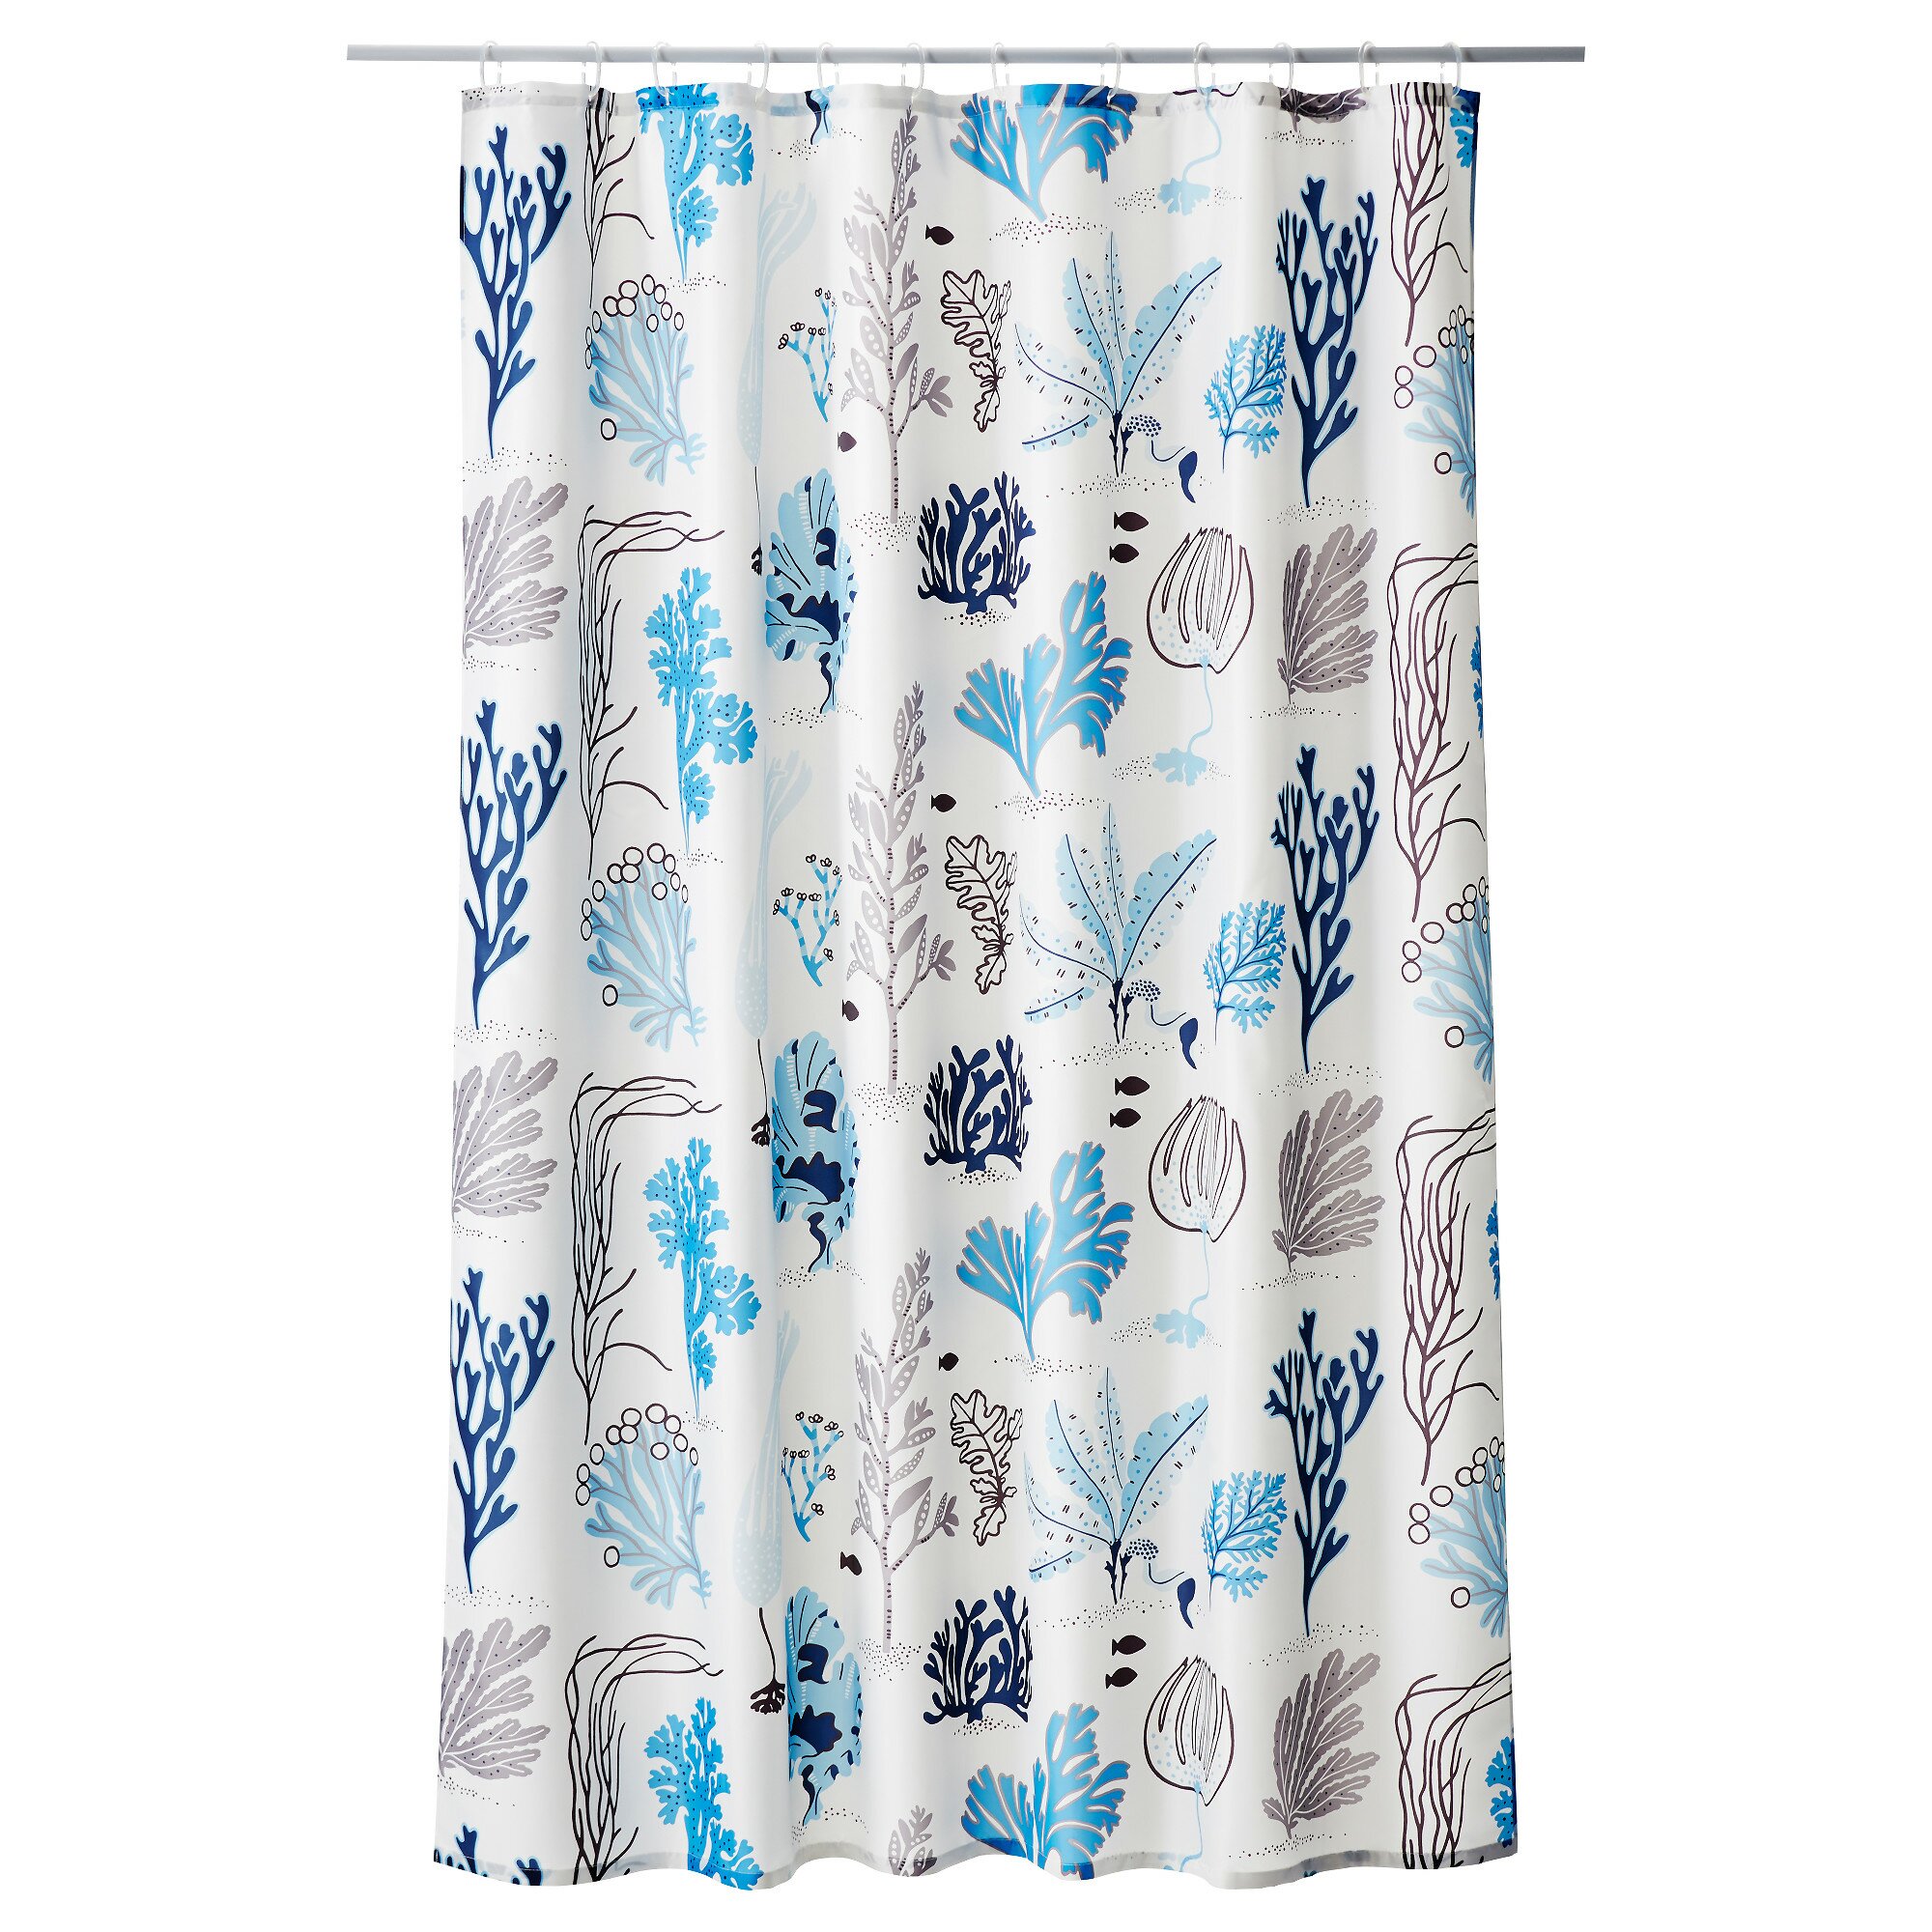 Ikea Shower Curtain for Best Your Bathroom Decoration: Shower Curtains Ikea | Standard Shower Curtain Length | Ikea Shower Curtain